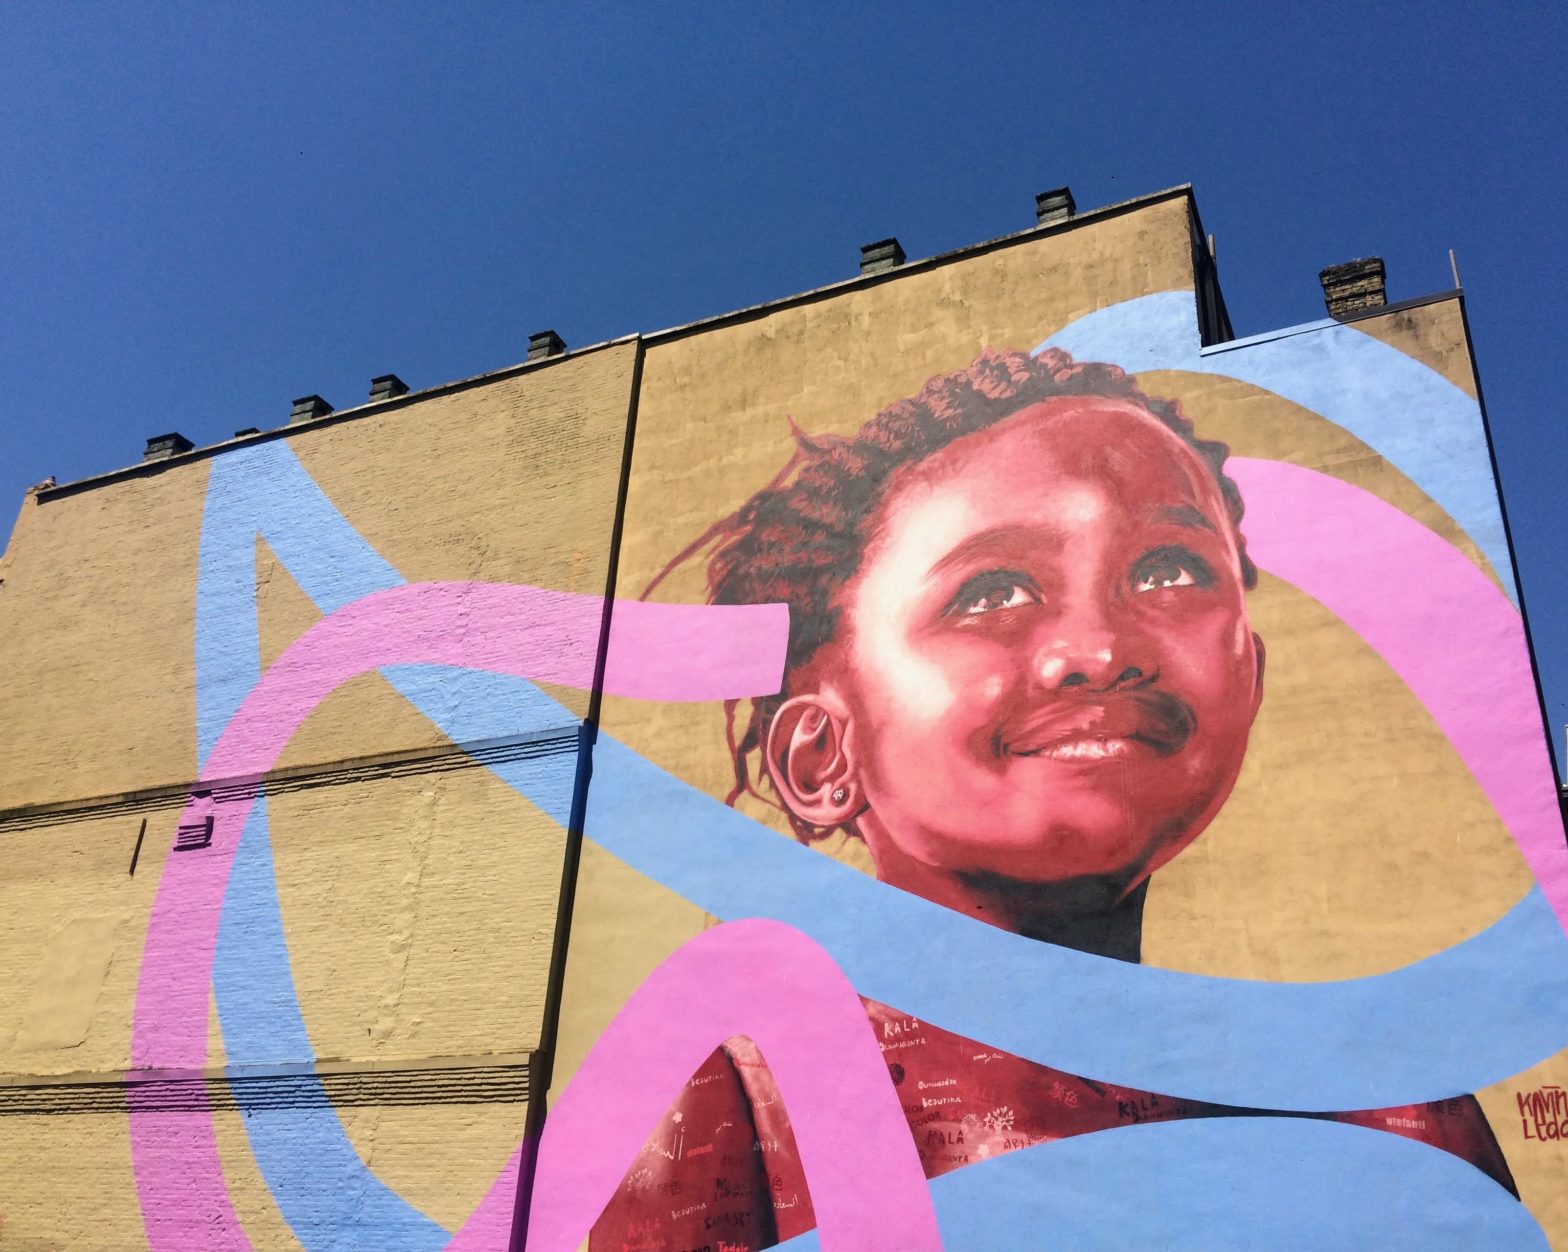 Check Out This Street Art Celebrating Black Culture